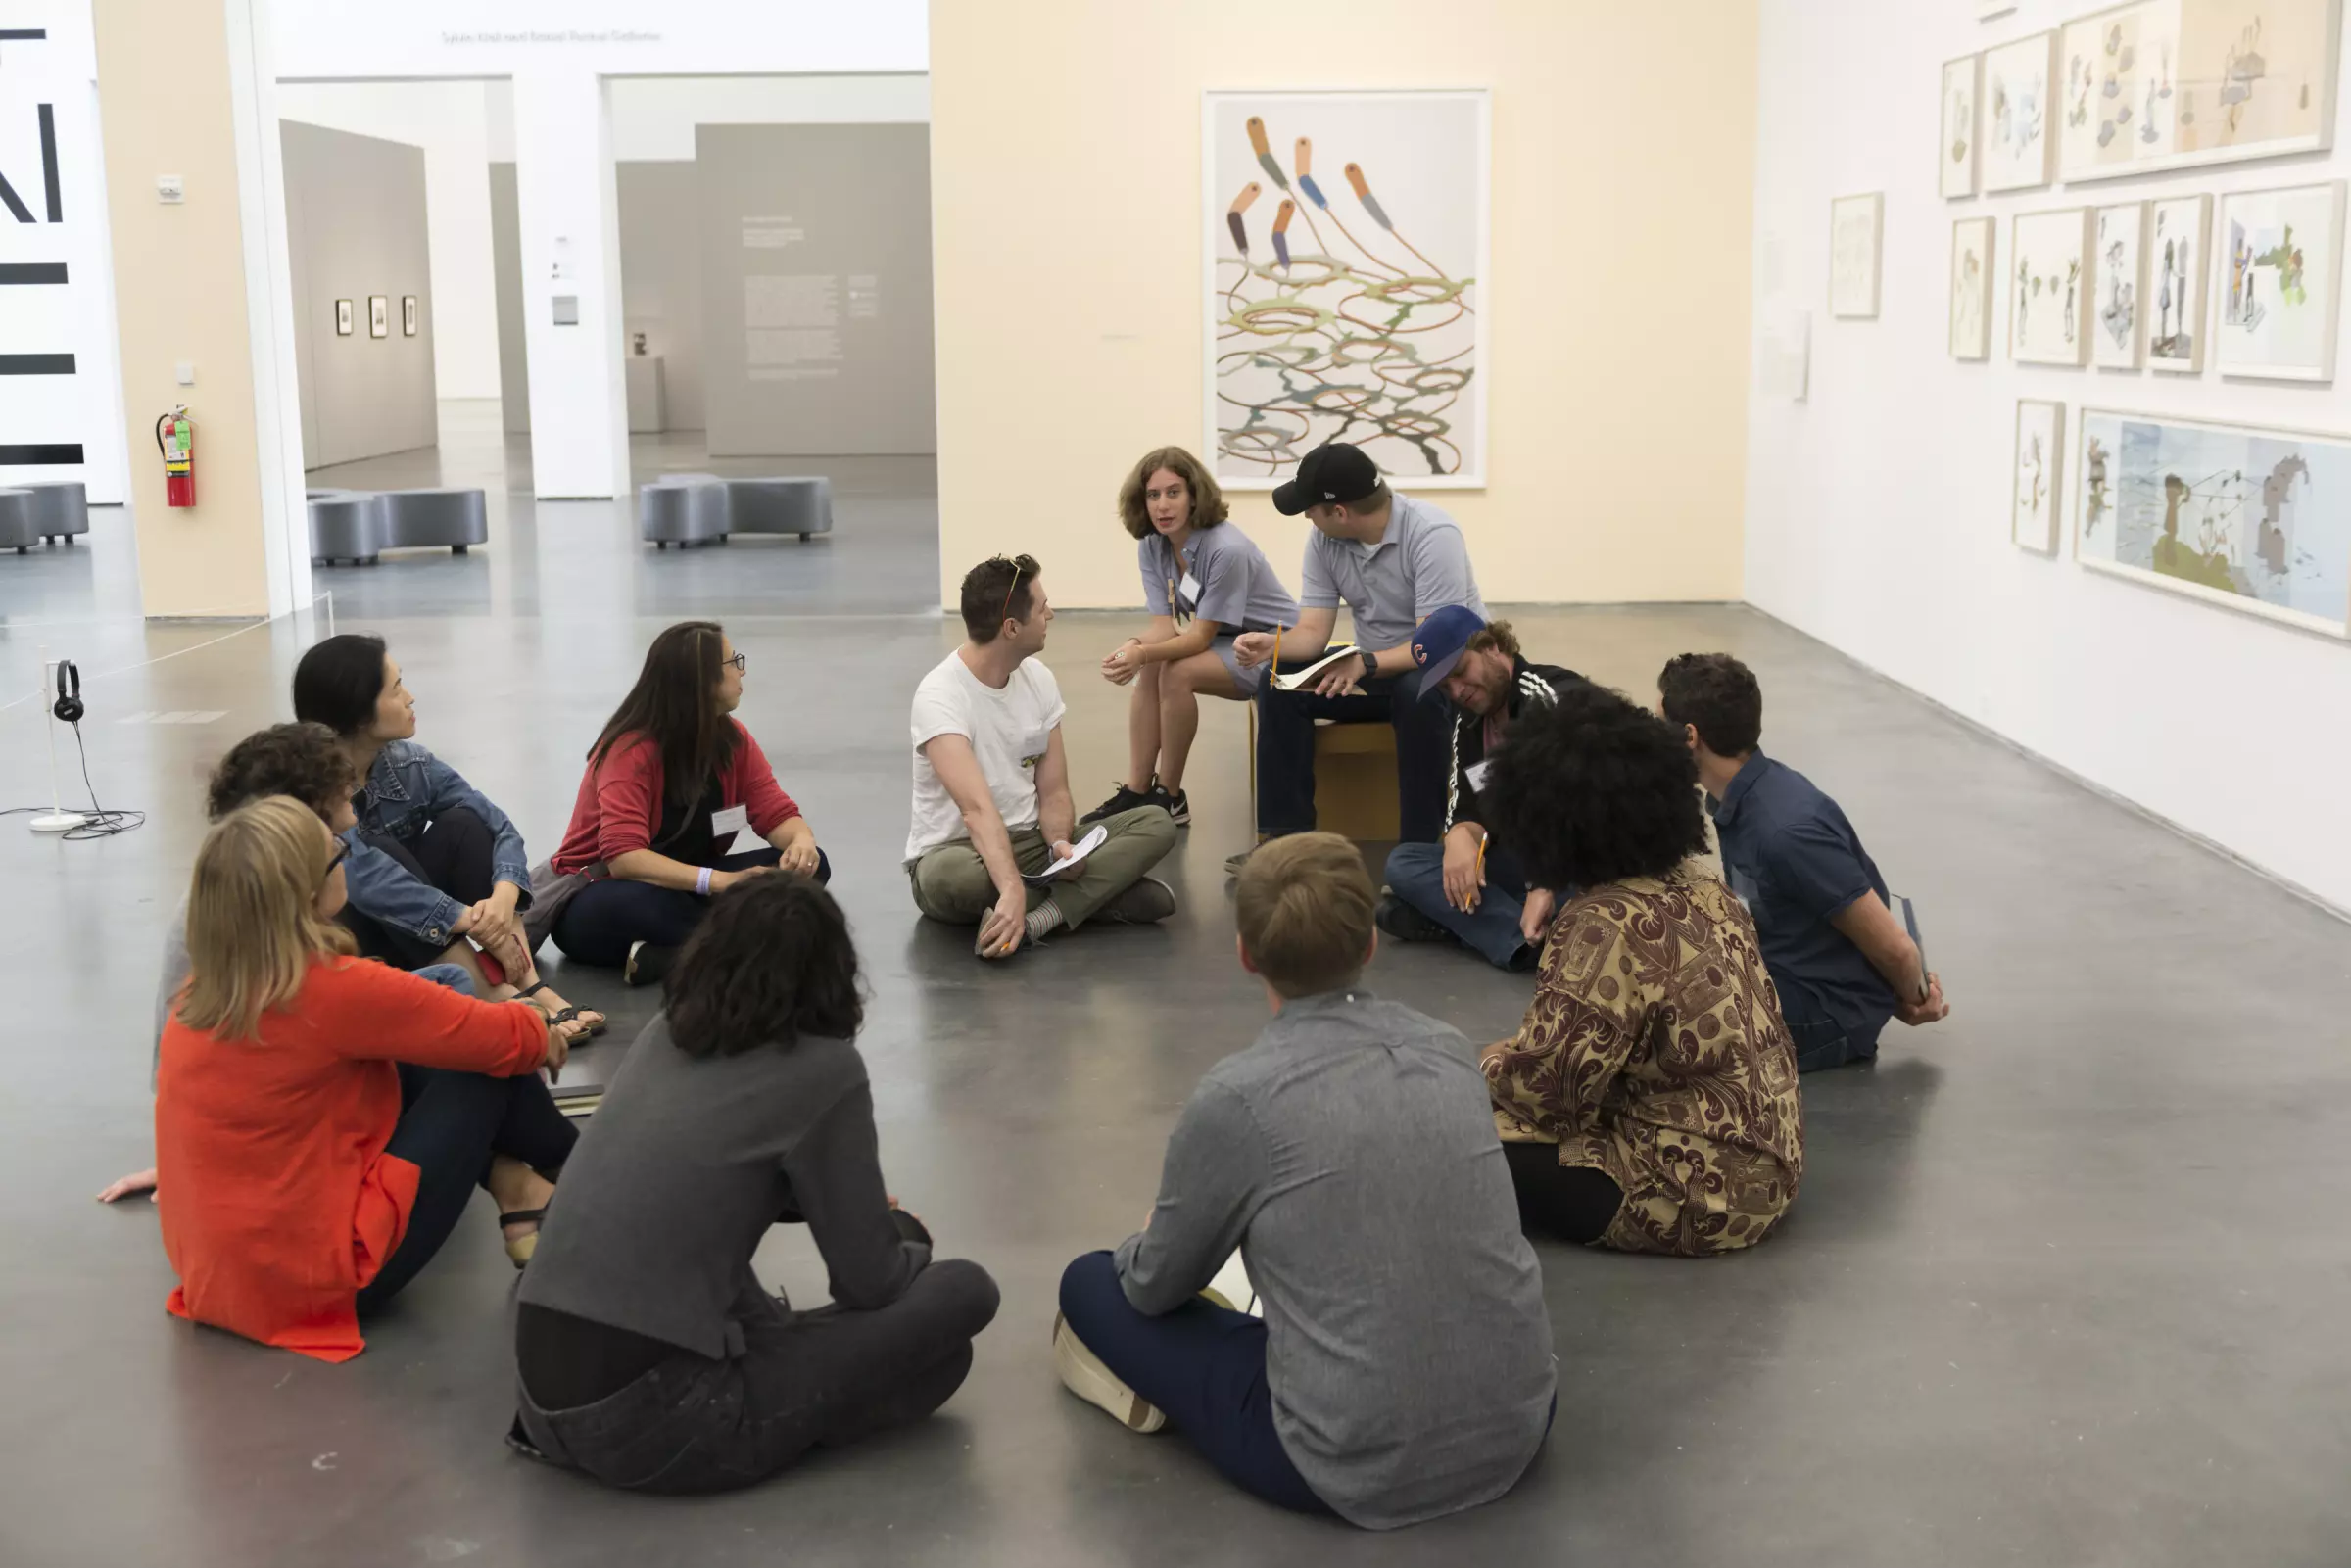 A group sitting on floor in a circle within a gallery space